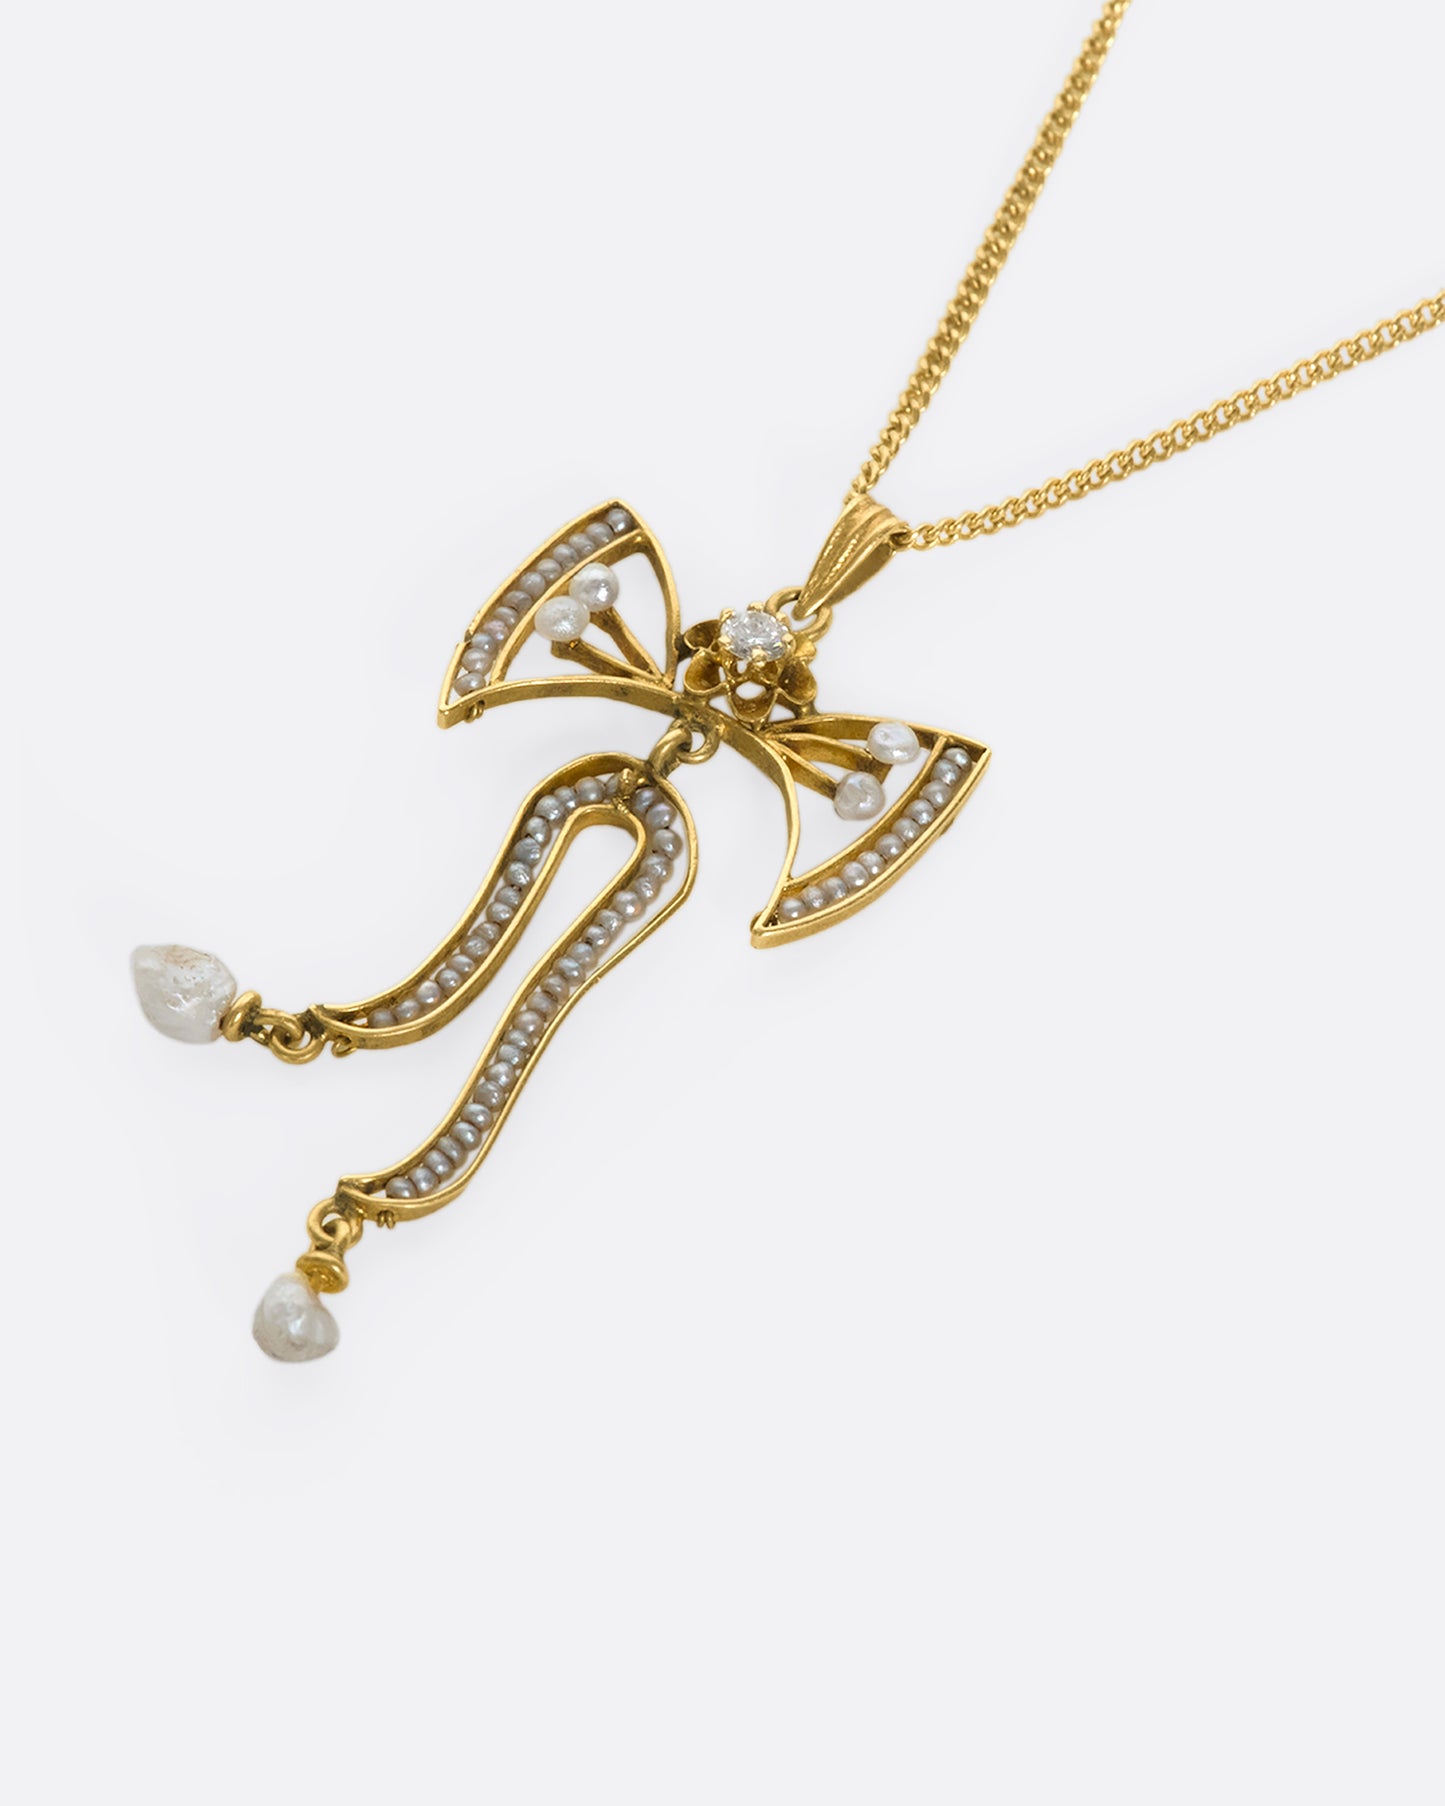 A slightly angled close up view of a yellow gold bow pendant with seed pearls and a diamond laying down flat..